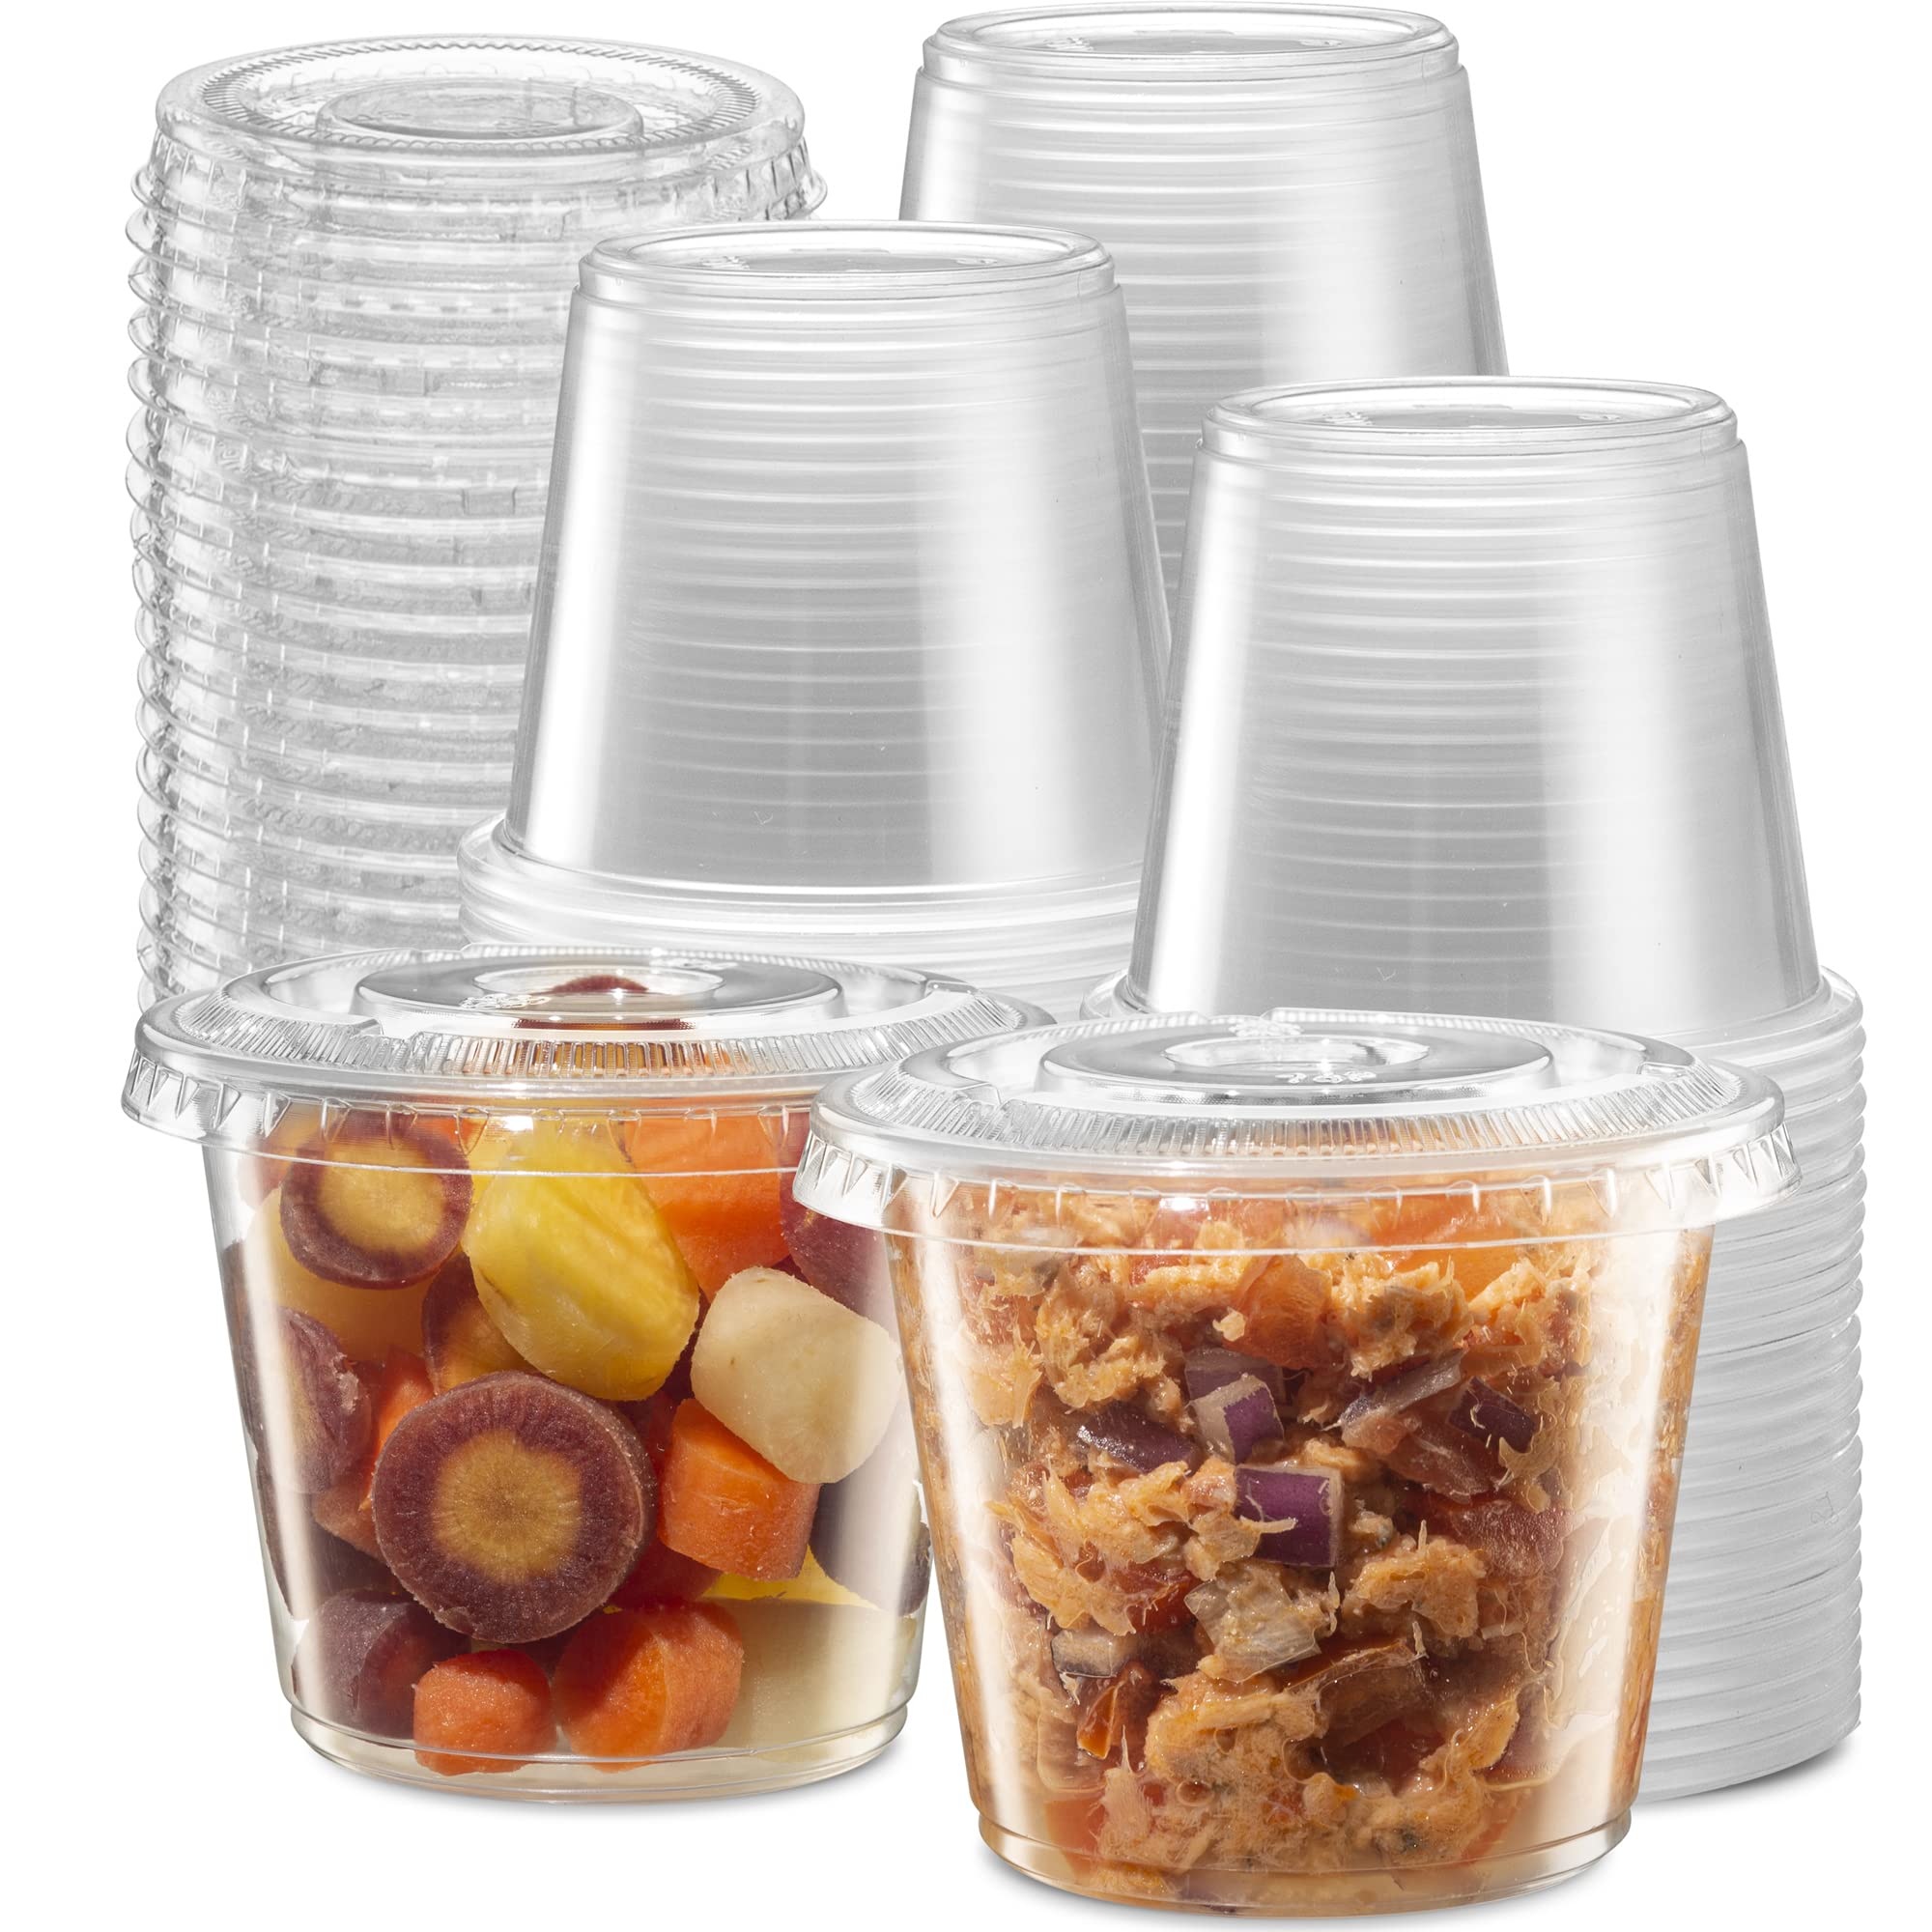 Leakproof, BPA Free 5.5 oz Souffle Cups and Lids 200 PK. Stackable Portion  Containers for Sampling, Salad Dressing, Sauces, Jello Shots. Plastic Food  Prep Supplies for Restaurant, Cafe, Catering, Deli 200 Cup